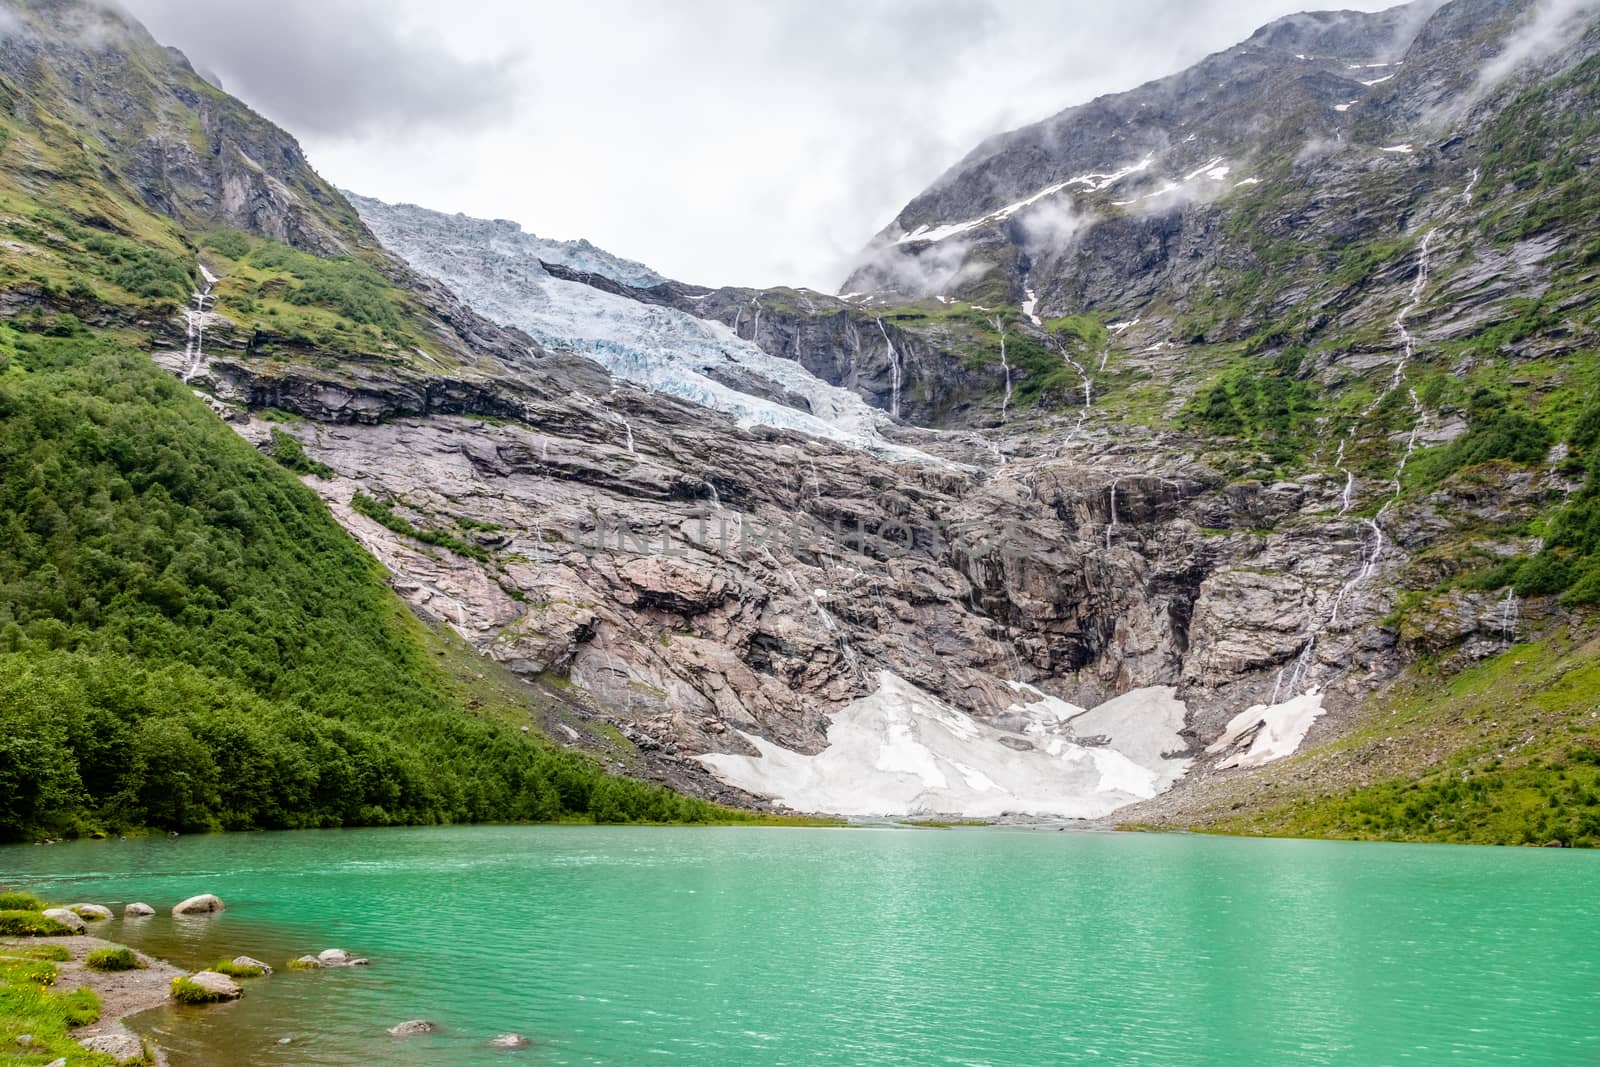 Boeyabreen Glacier in the mountains with lake in the foreground, Jostedalsbreen National Park, Fjaerland, Norway